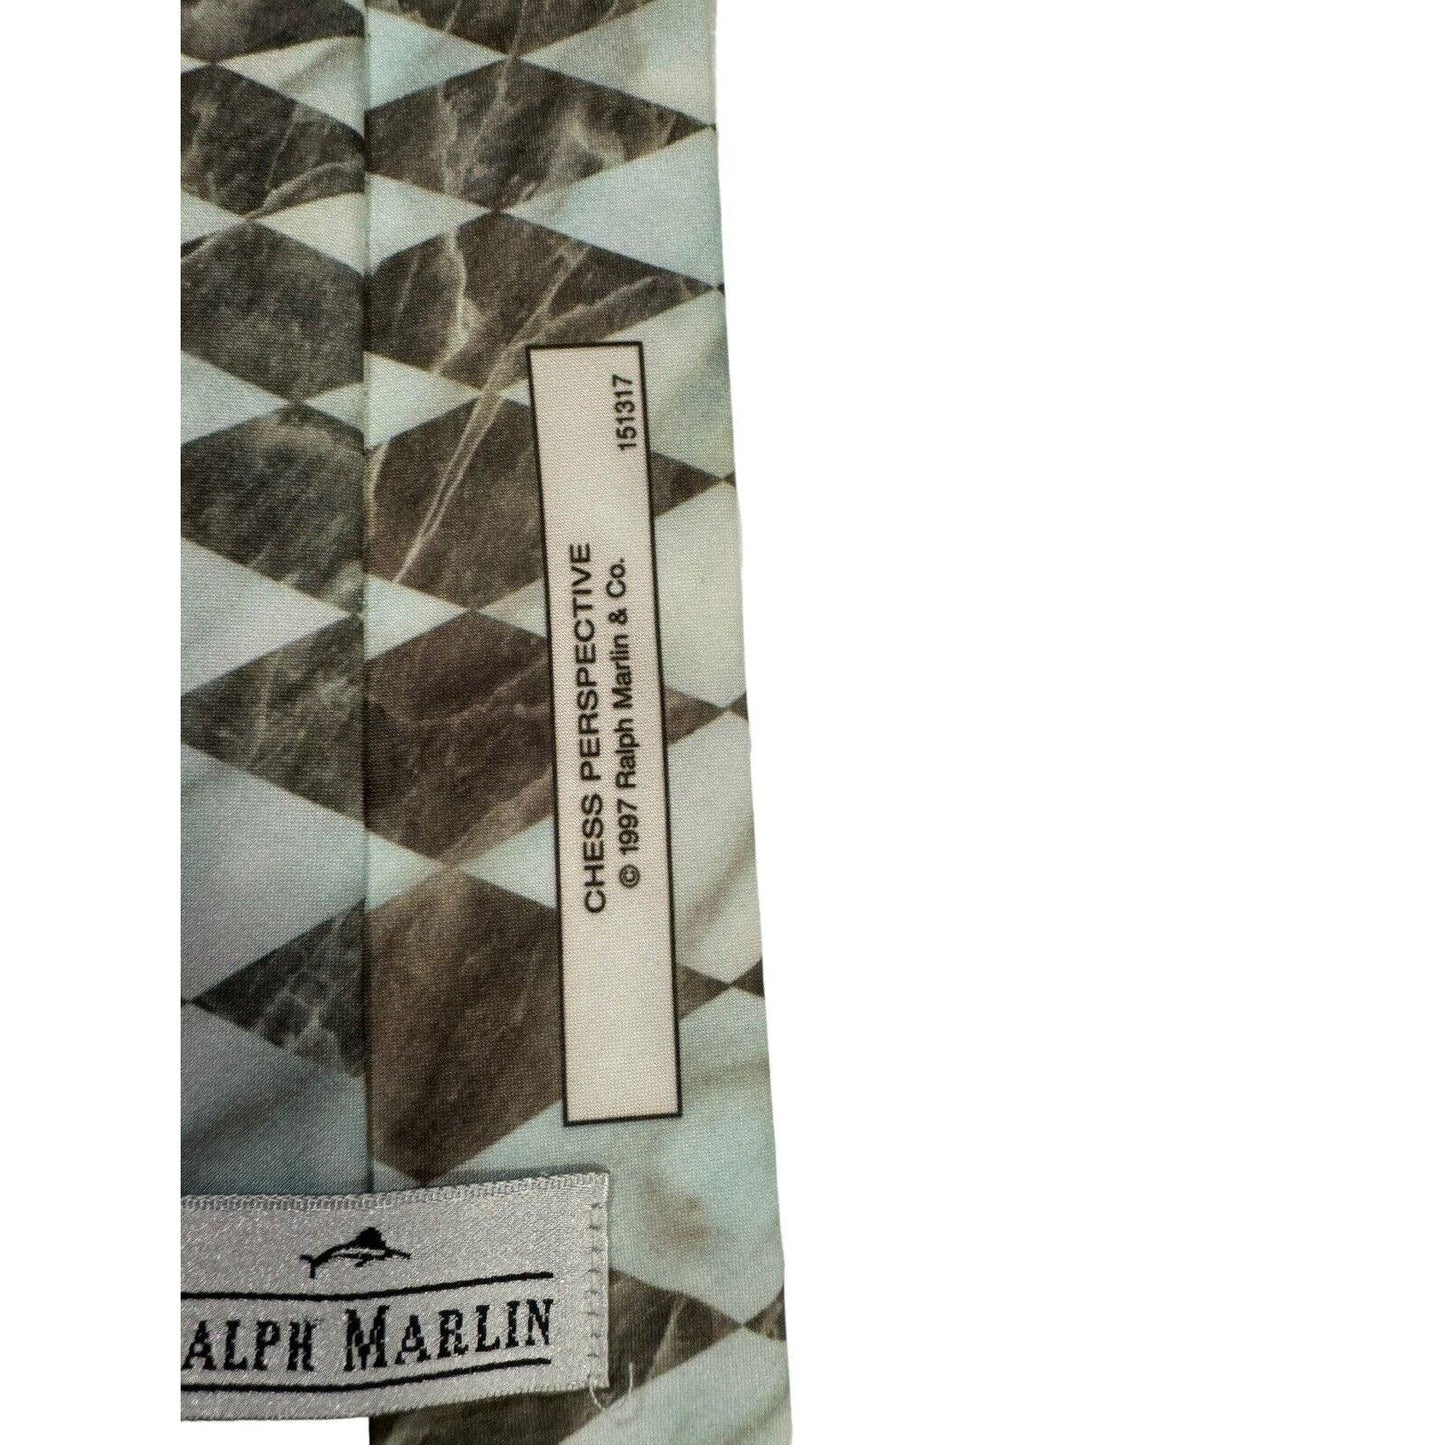 Ralph Marlin Chess Perspective Game Vintage Novelty Necktie Polyester